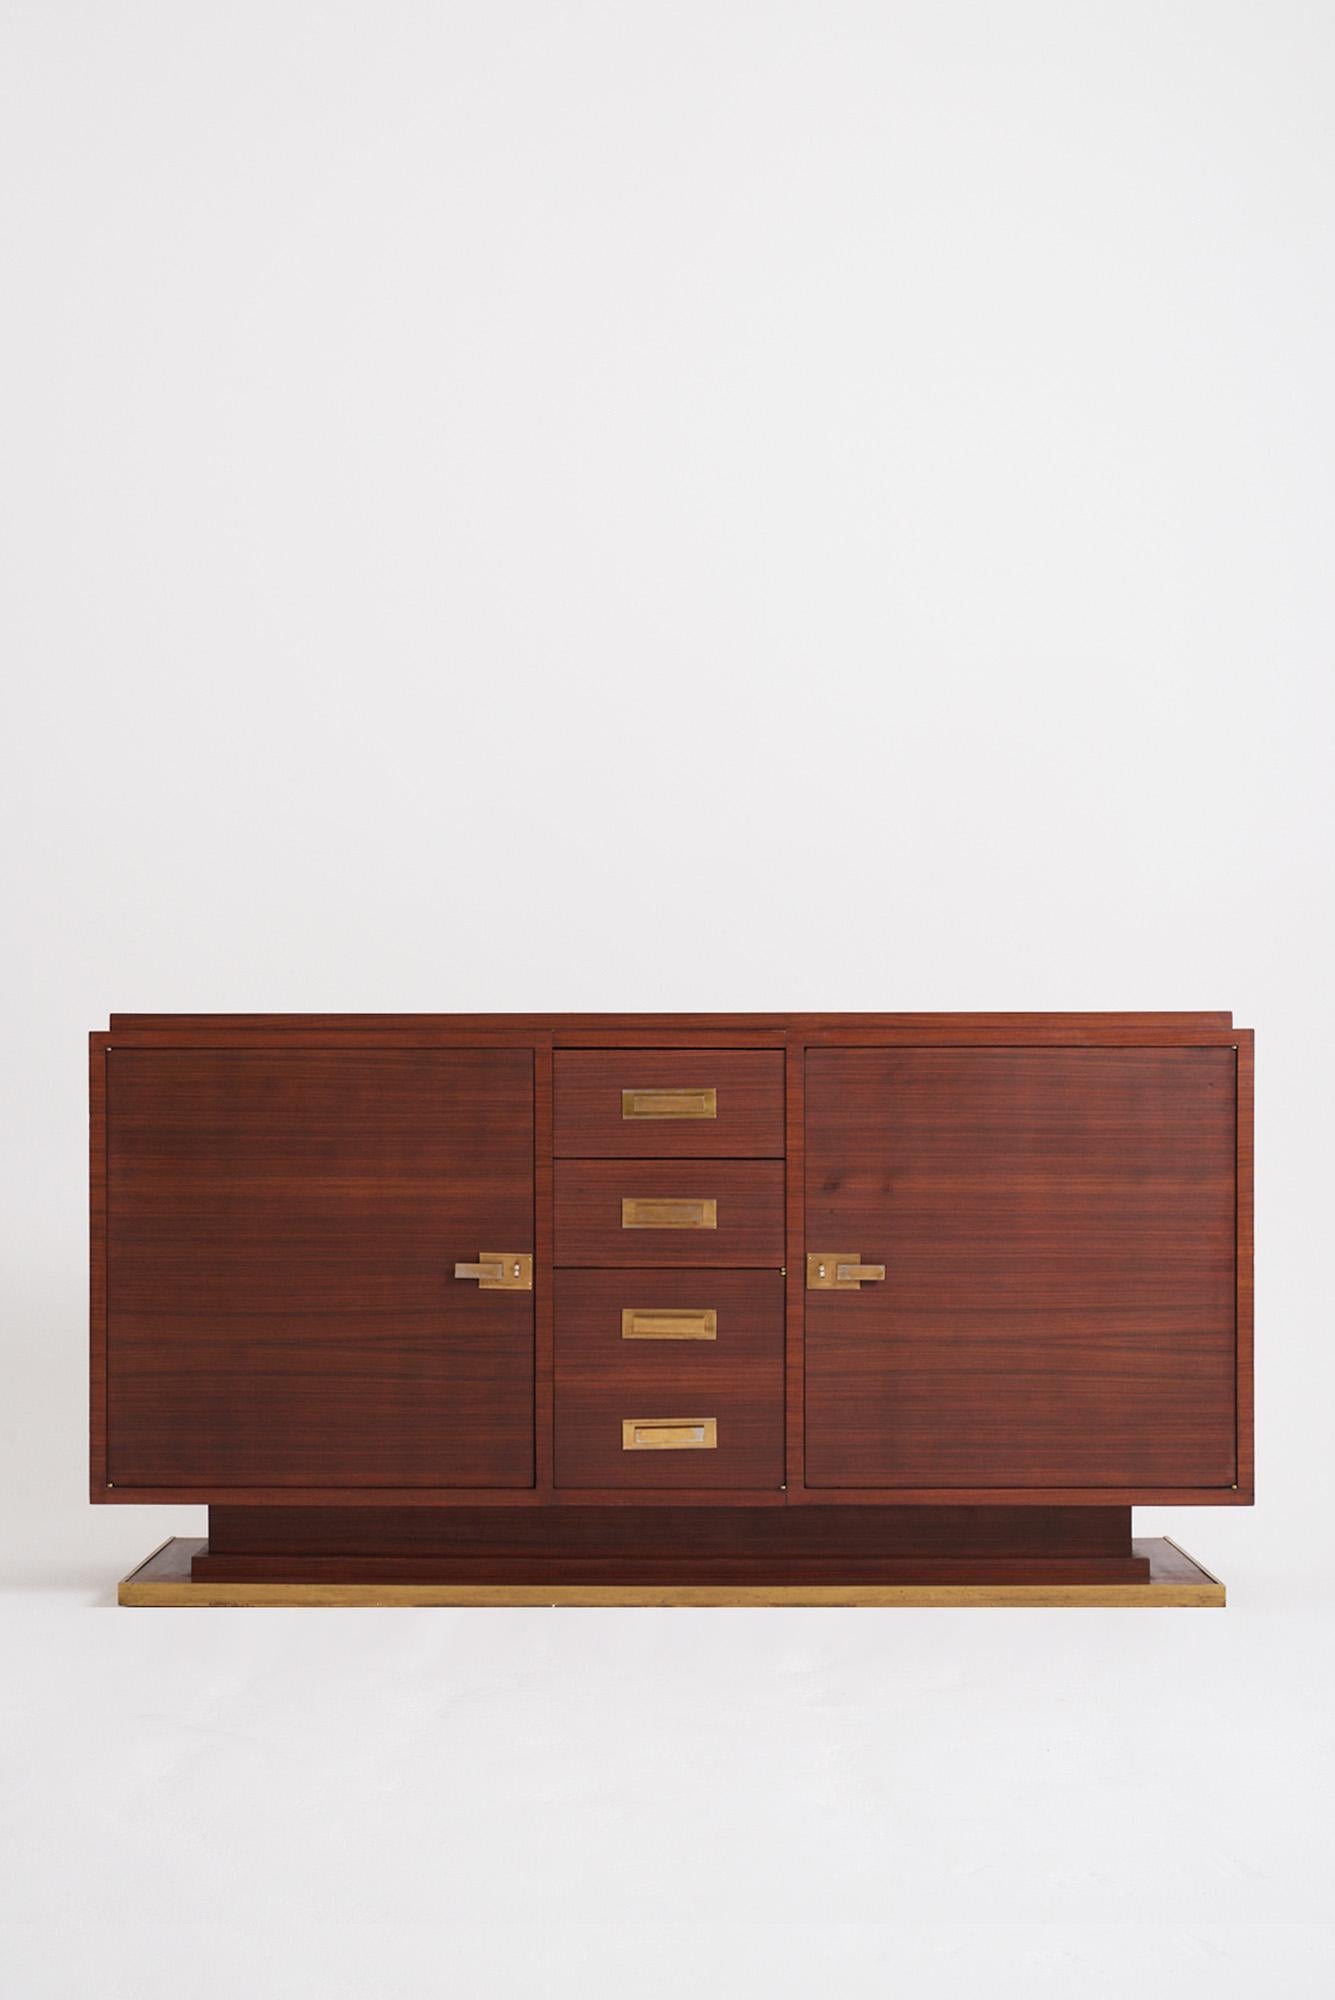 An Art Deco mahogany and bronze sideboard by Louis Bonnin.
France, circa 1935
102 cm high by 200 cm wide by 52 cm depth